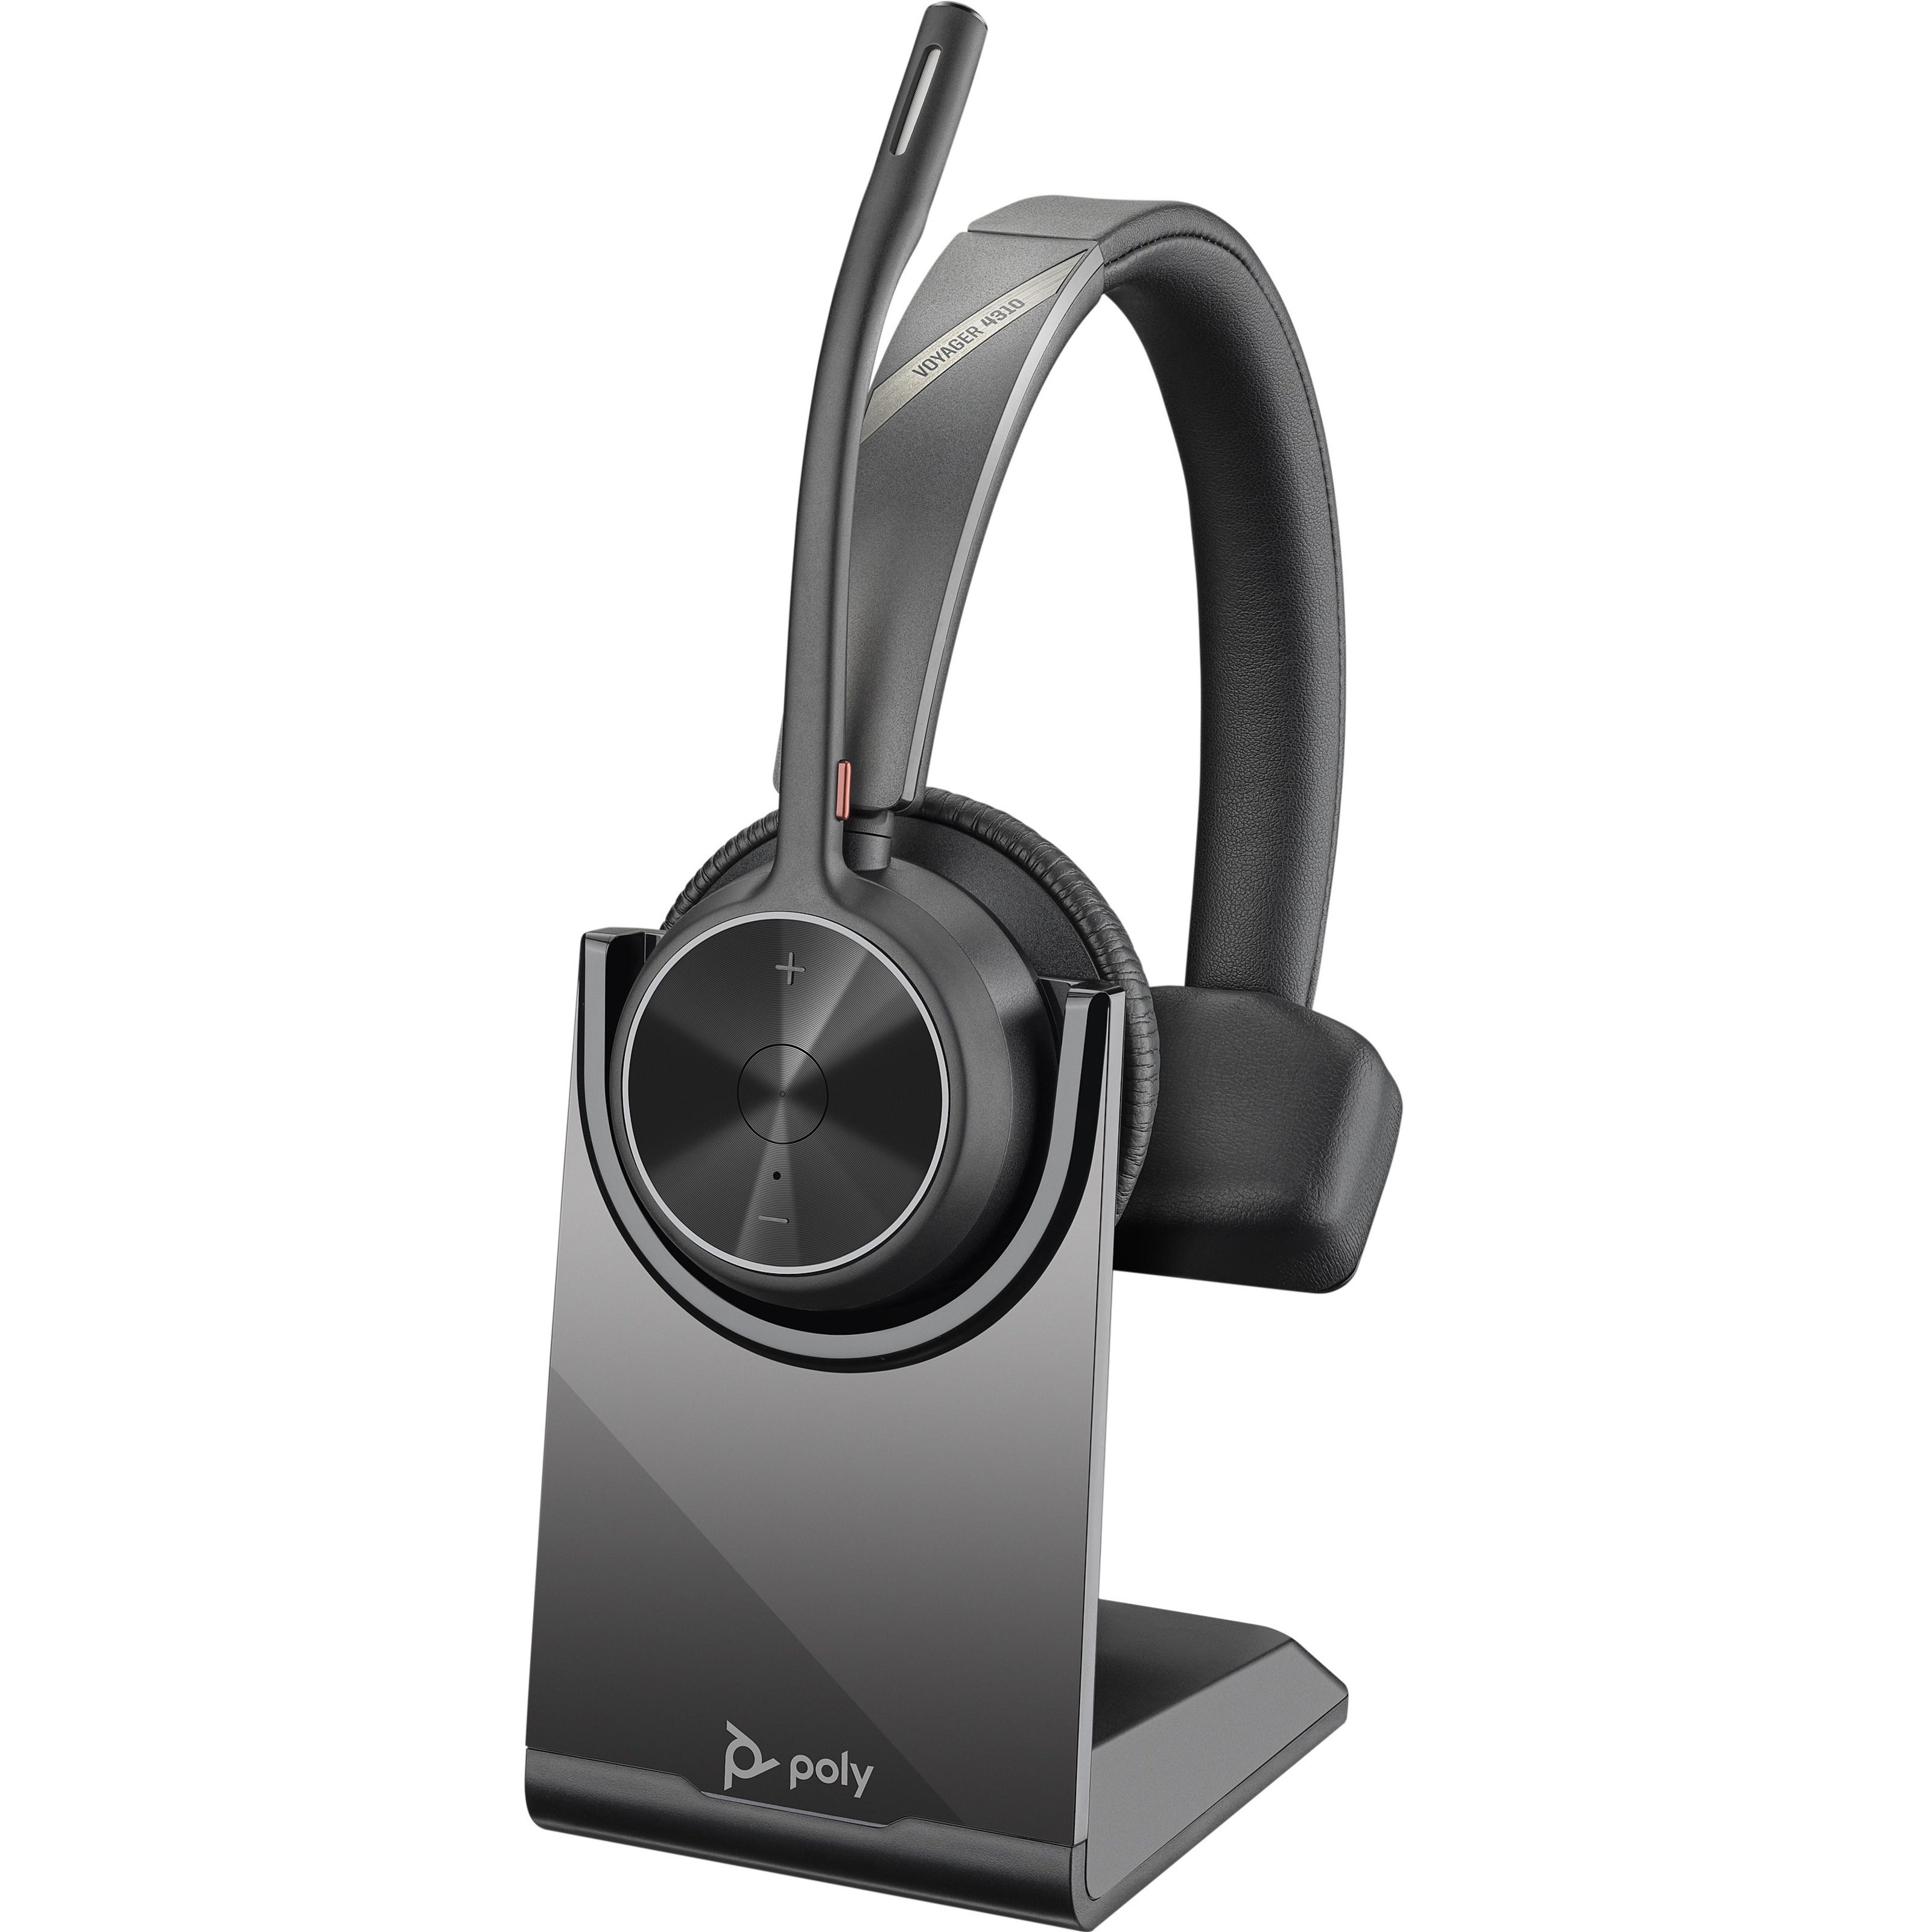 Poly 218474-01 Voyager 4310 UC Wireless Headset with Charge Stand, USB-C